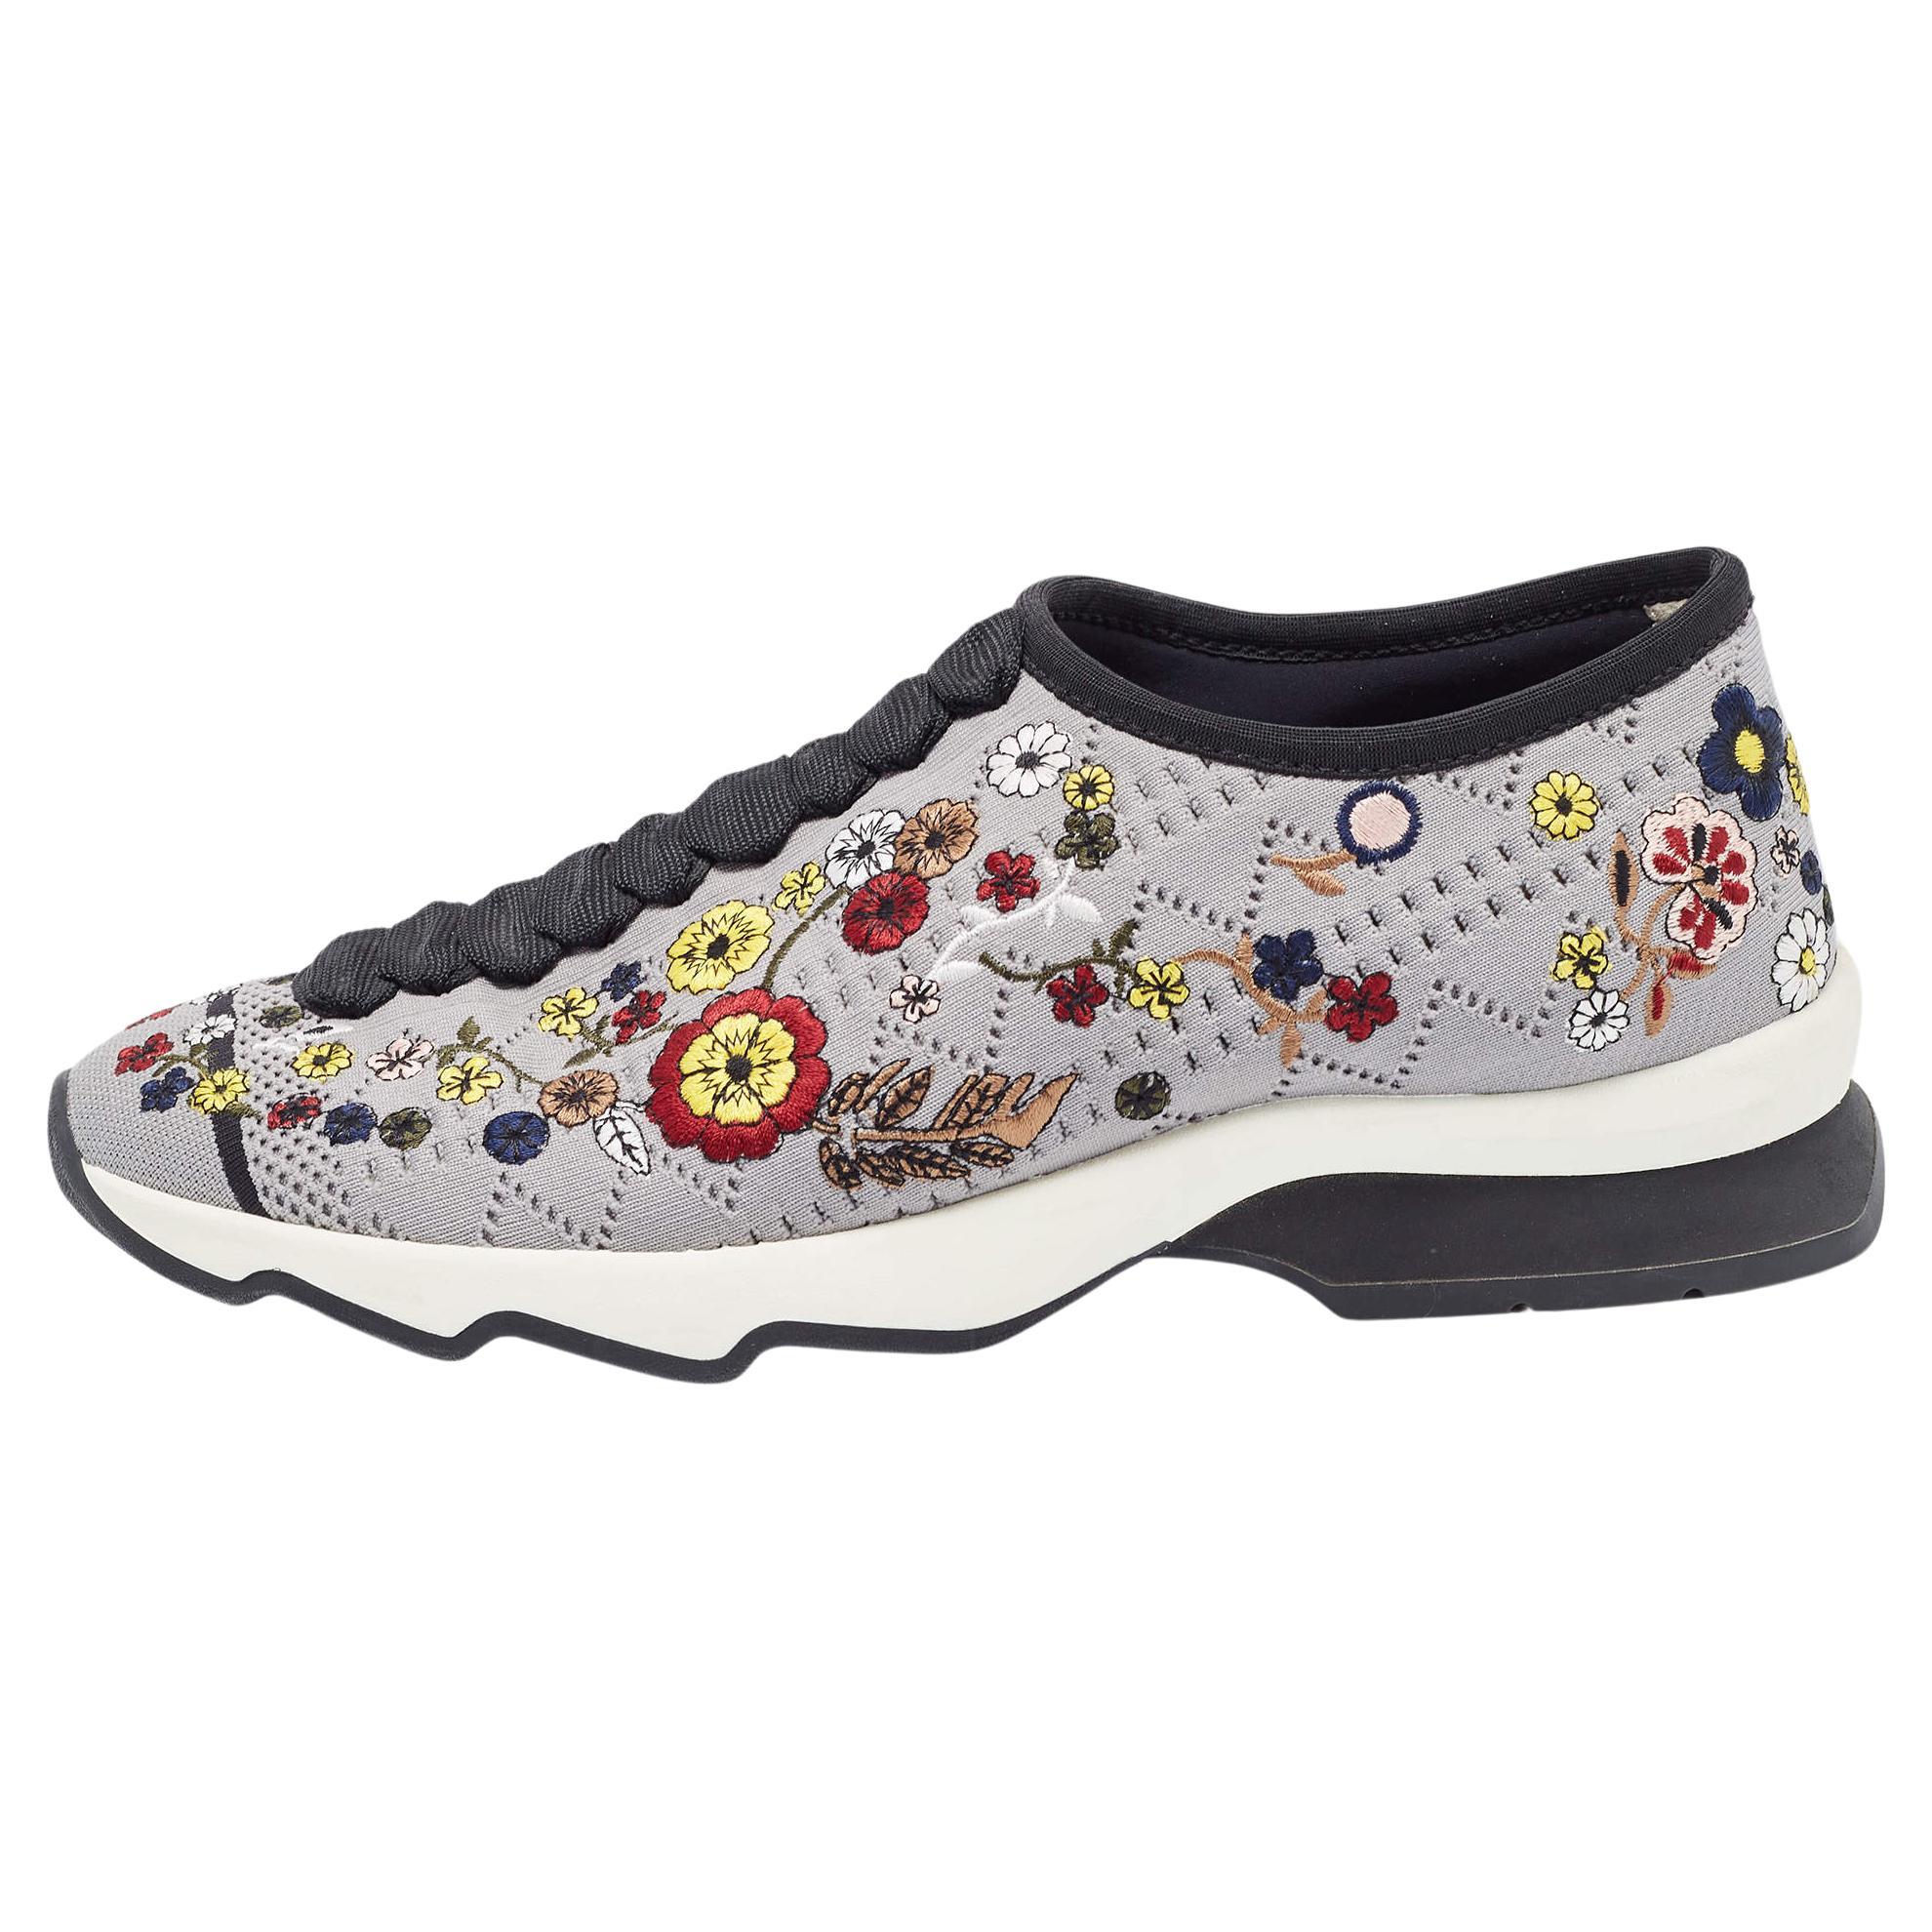 Fendi Grey Floral Embroidered Knit Fabric Slip On Sneakers Size 38 For Sale